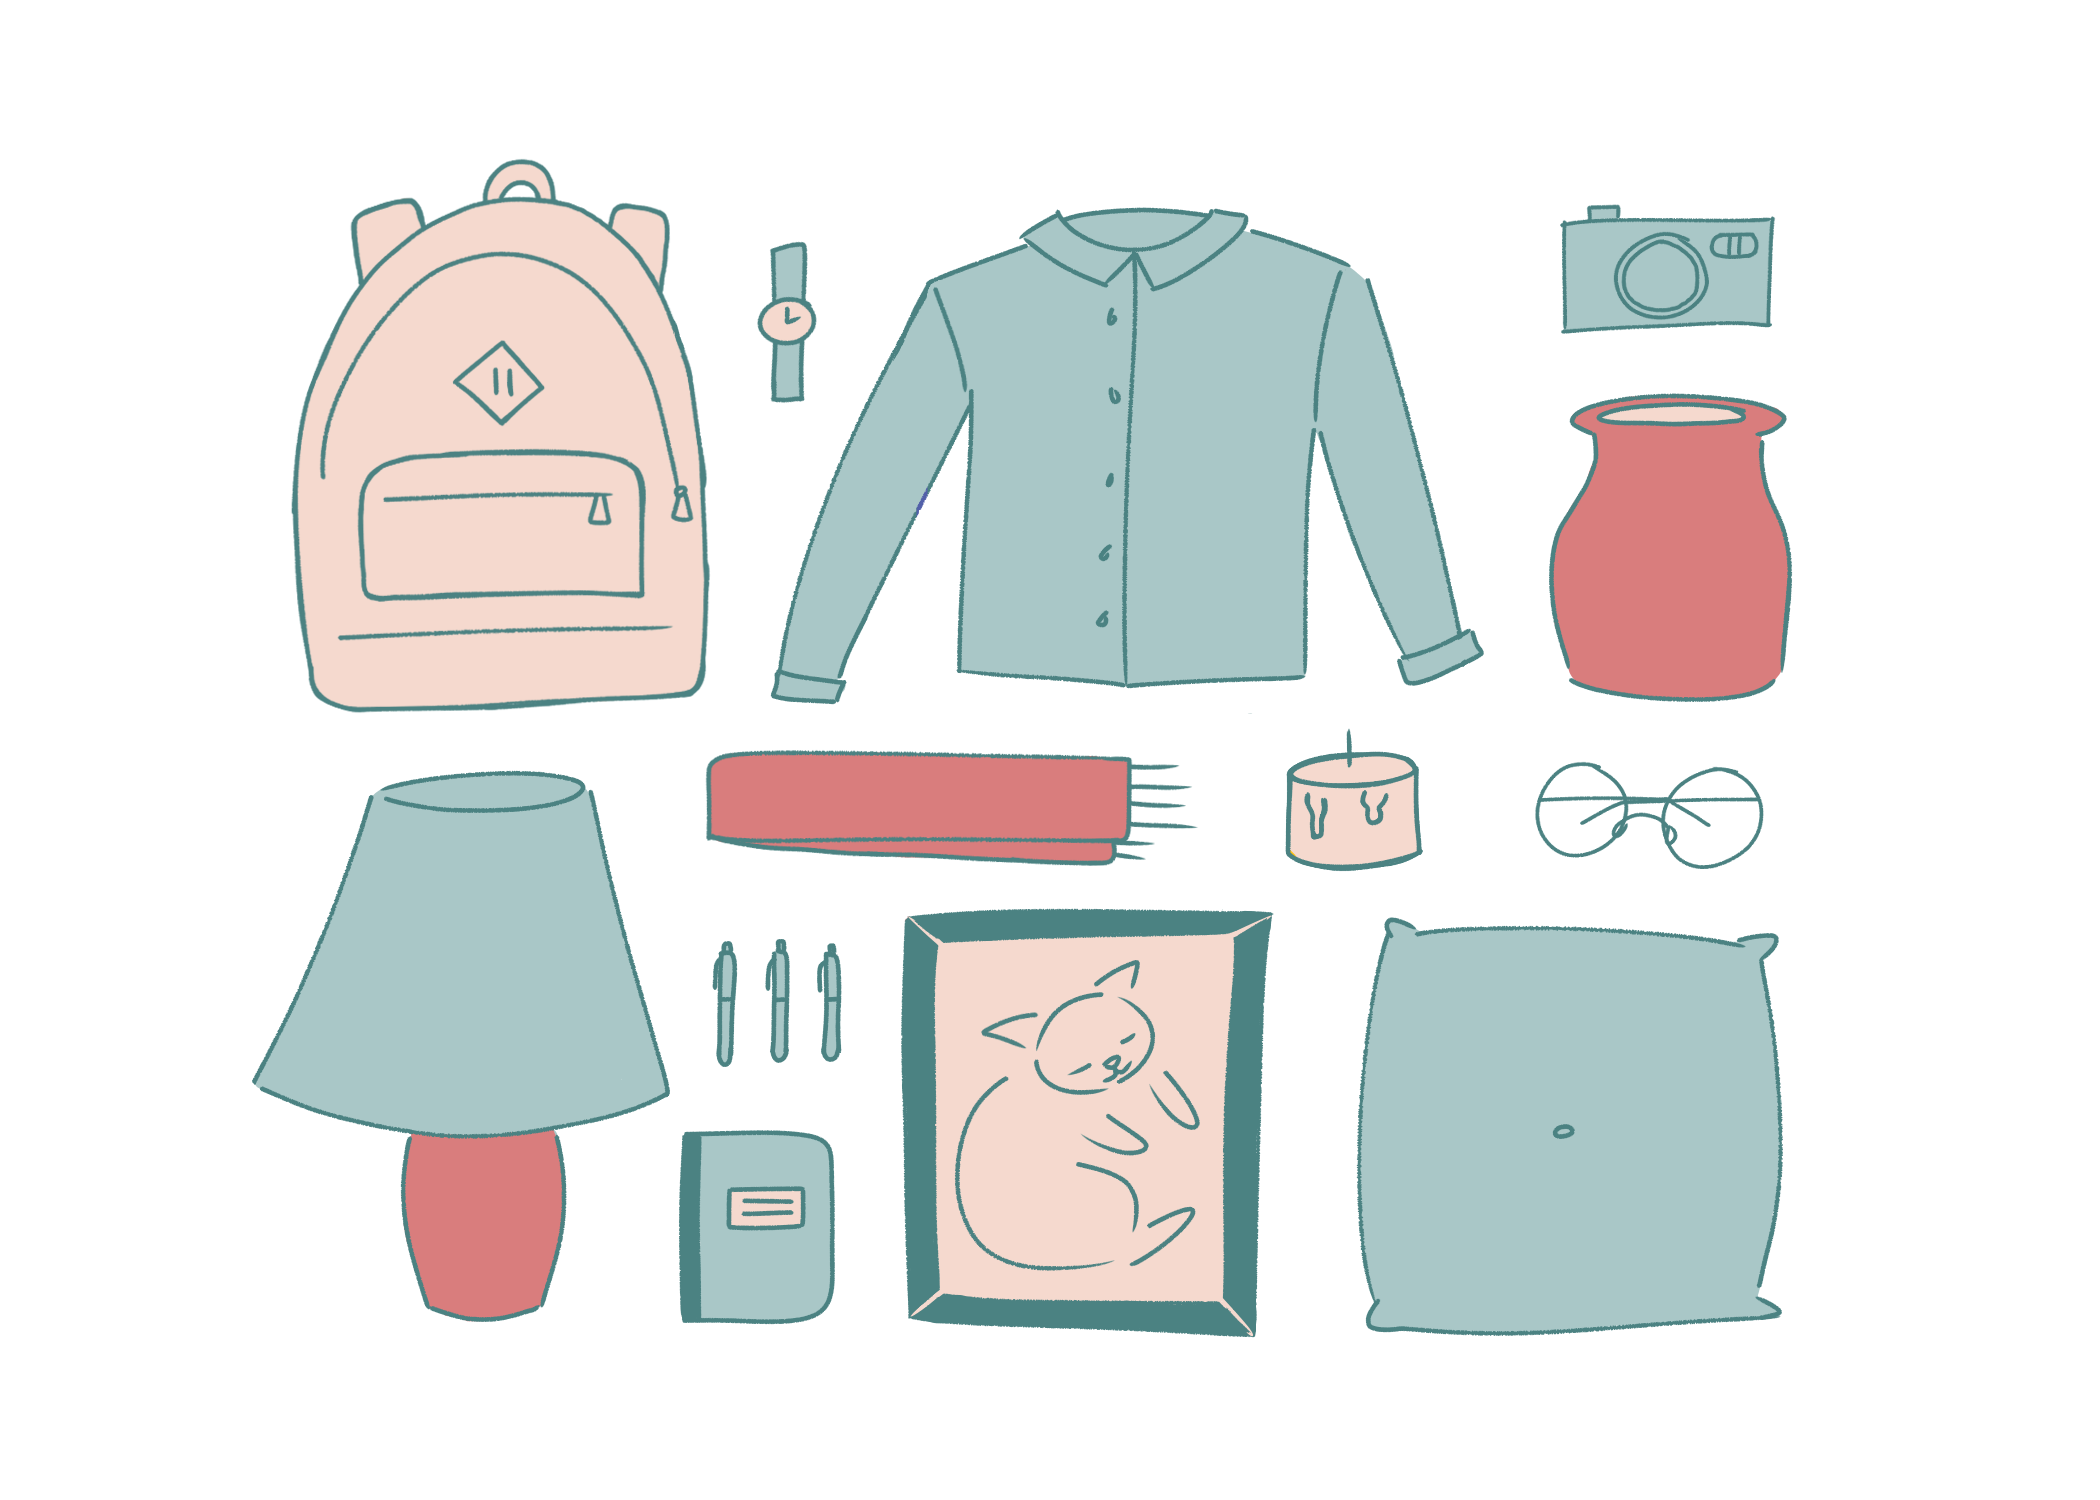 Illustration of fashion and home accessories (backpack, pillow, etc.) in shades of pink and blue